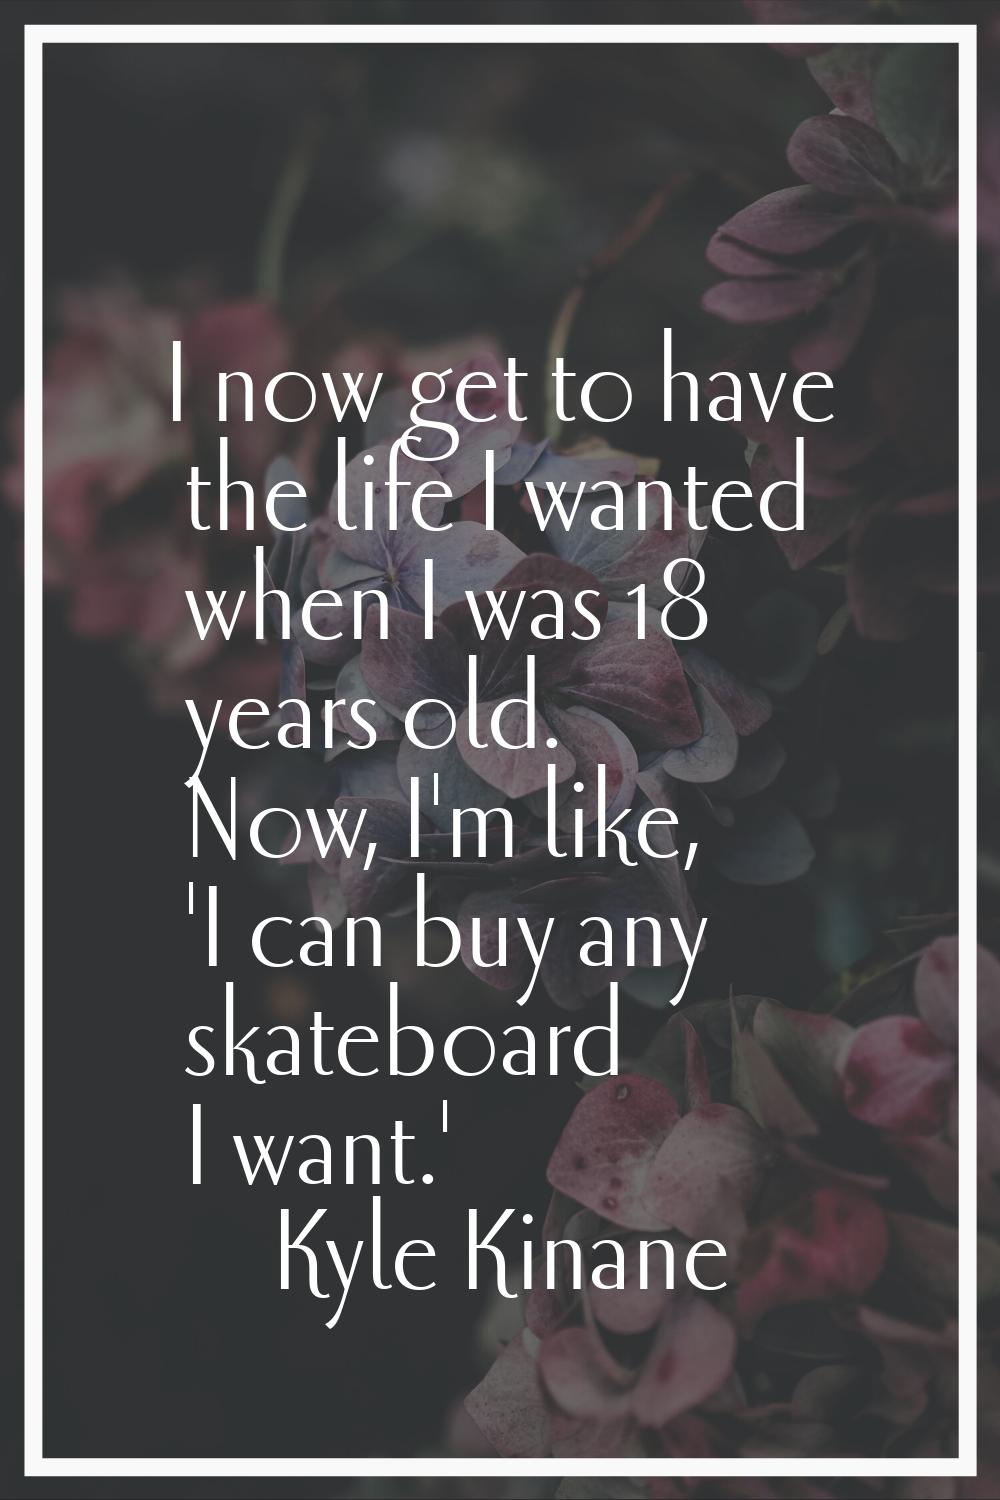 I now get to have the life I wanted when I was 18 years old. Now, I'm like, 'I can buy any skateboa